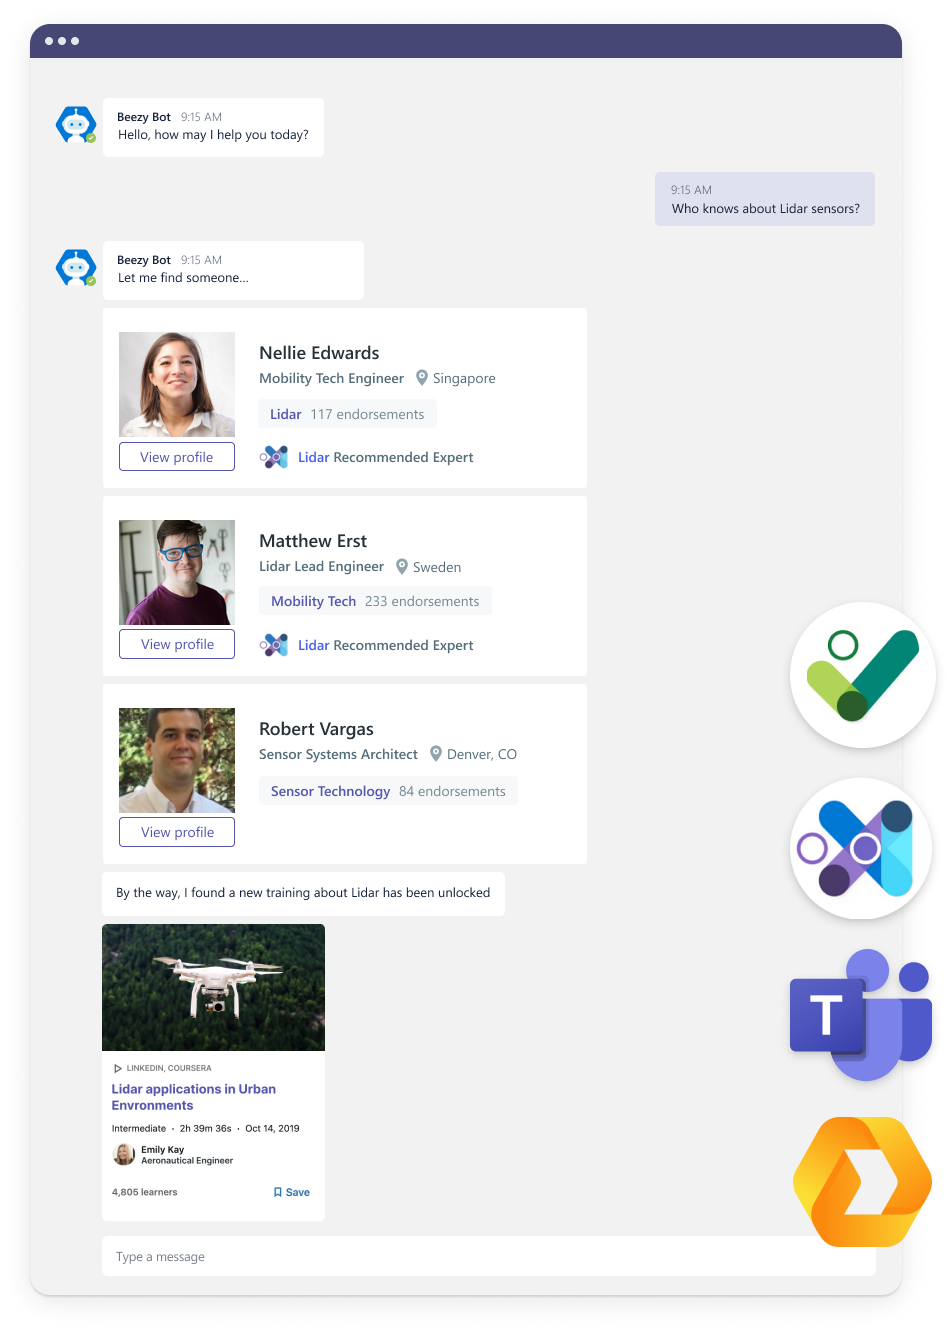 Beezy fully integrates with Microsoft Teams & Viva